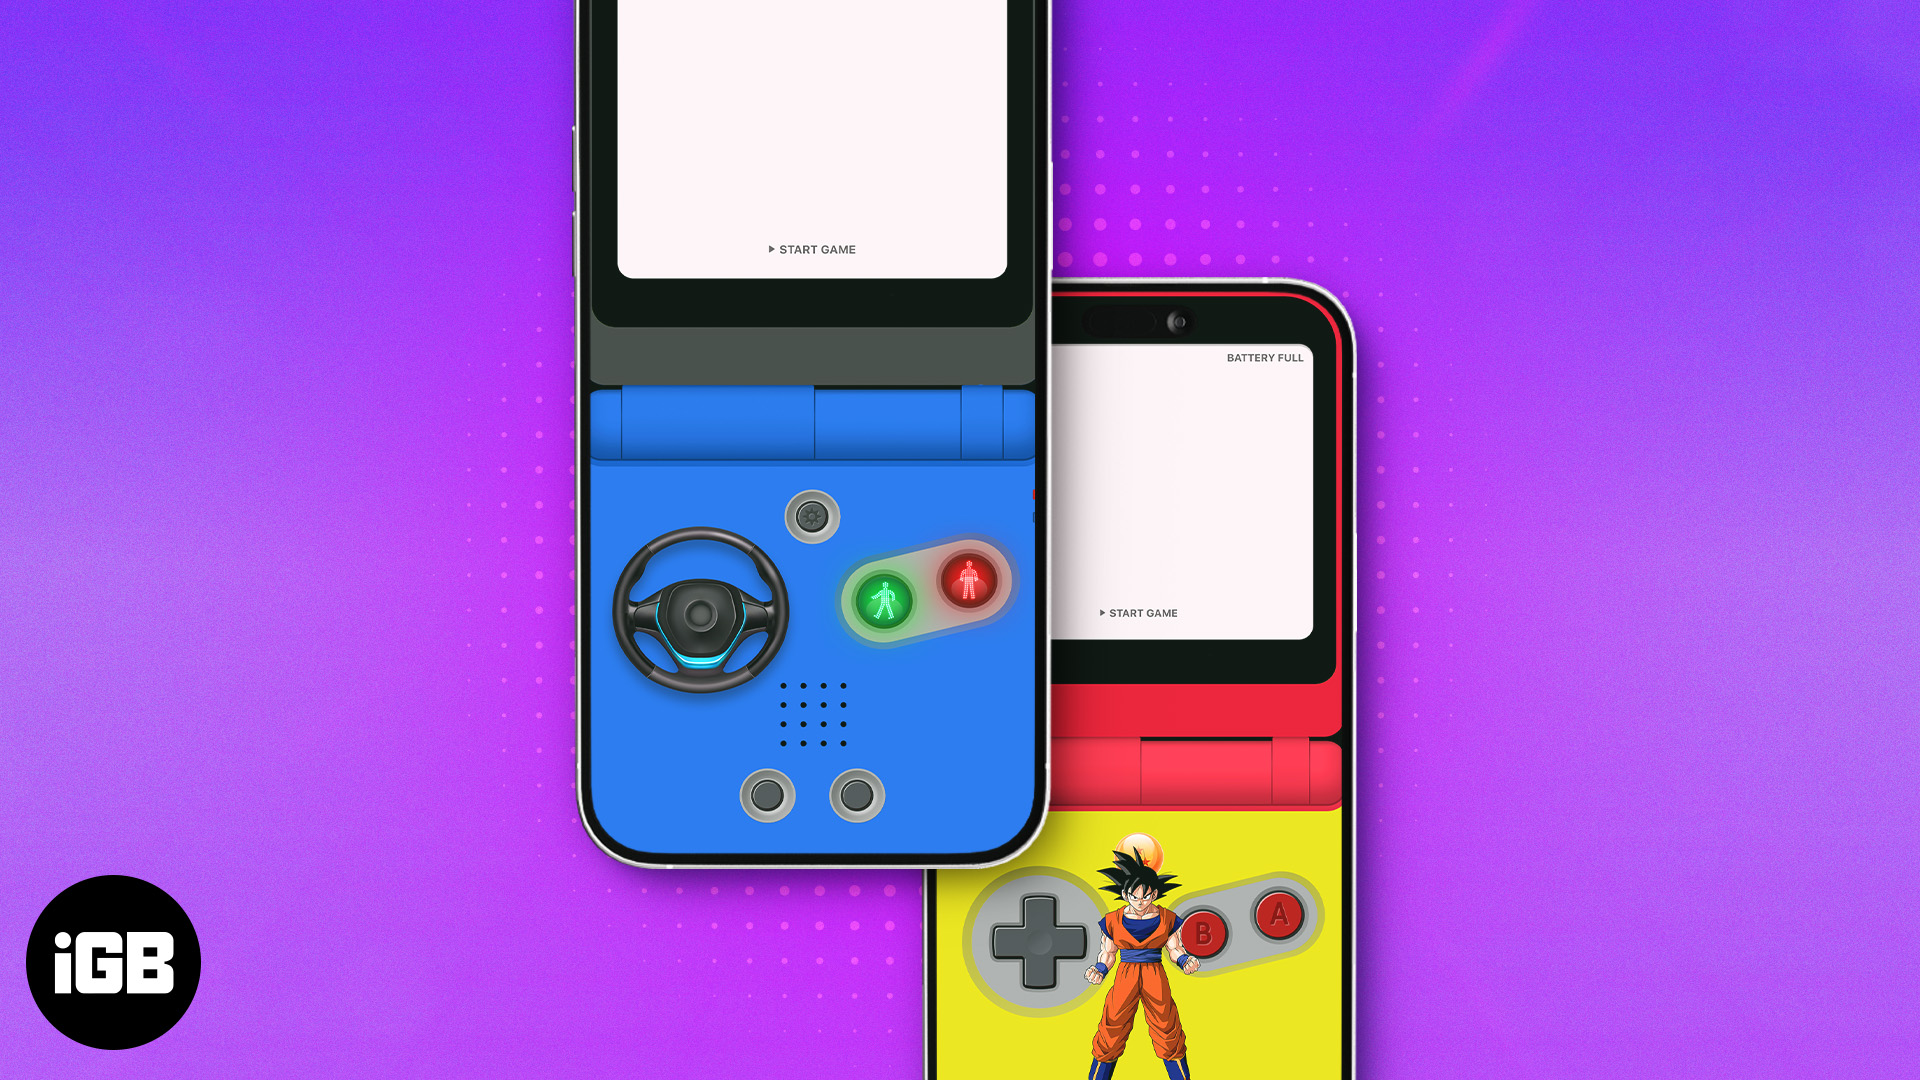 10 Amazing GameBoy wallpapers for iPhone: Download free